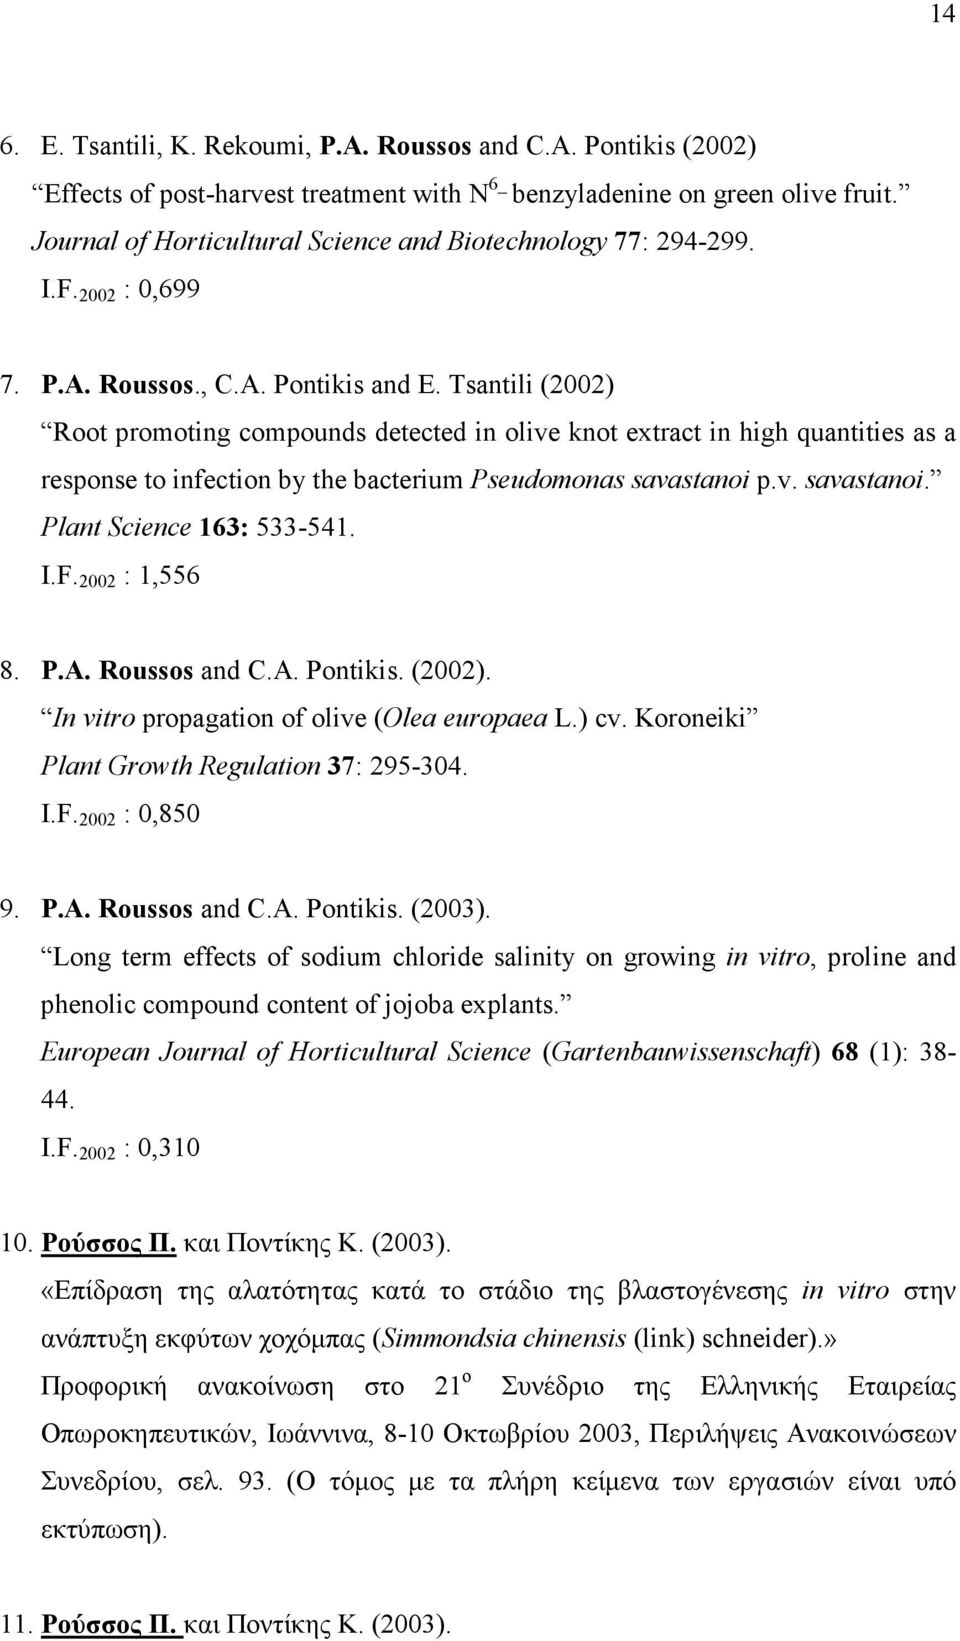 Tsantili (2002) Root promoting compounds detected in olive knot extract in high quantities as a response to infection by the bacterium Pseudomonas savastanoi p.v. savastanoi. Plant Science 163: 533-541.